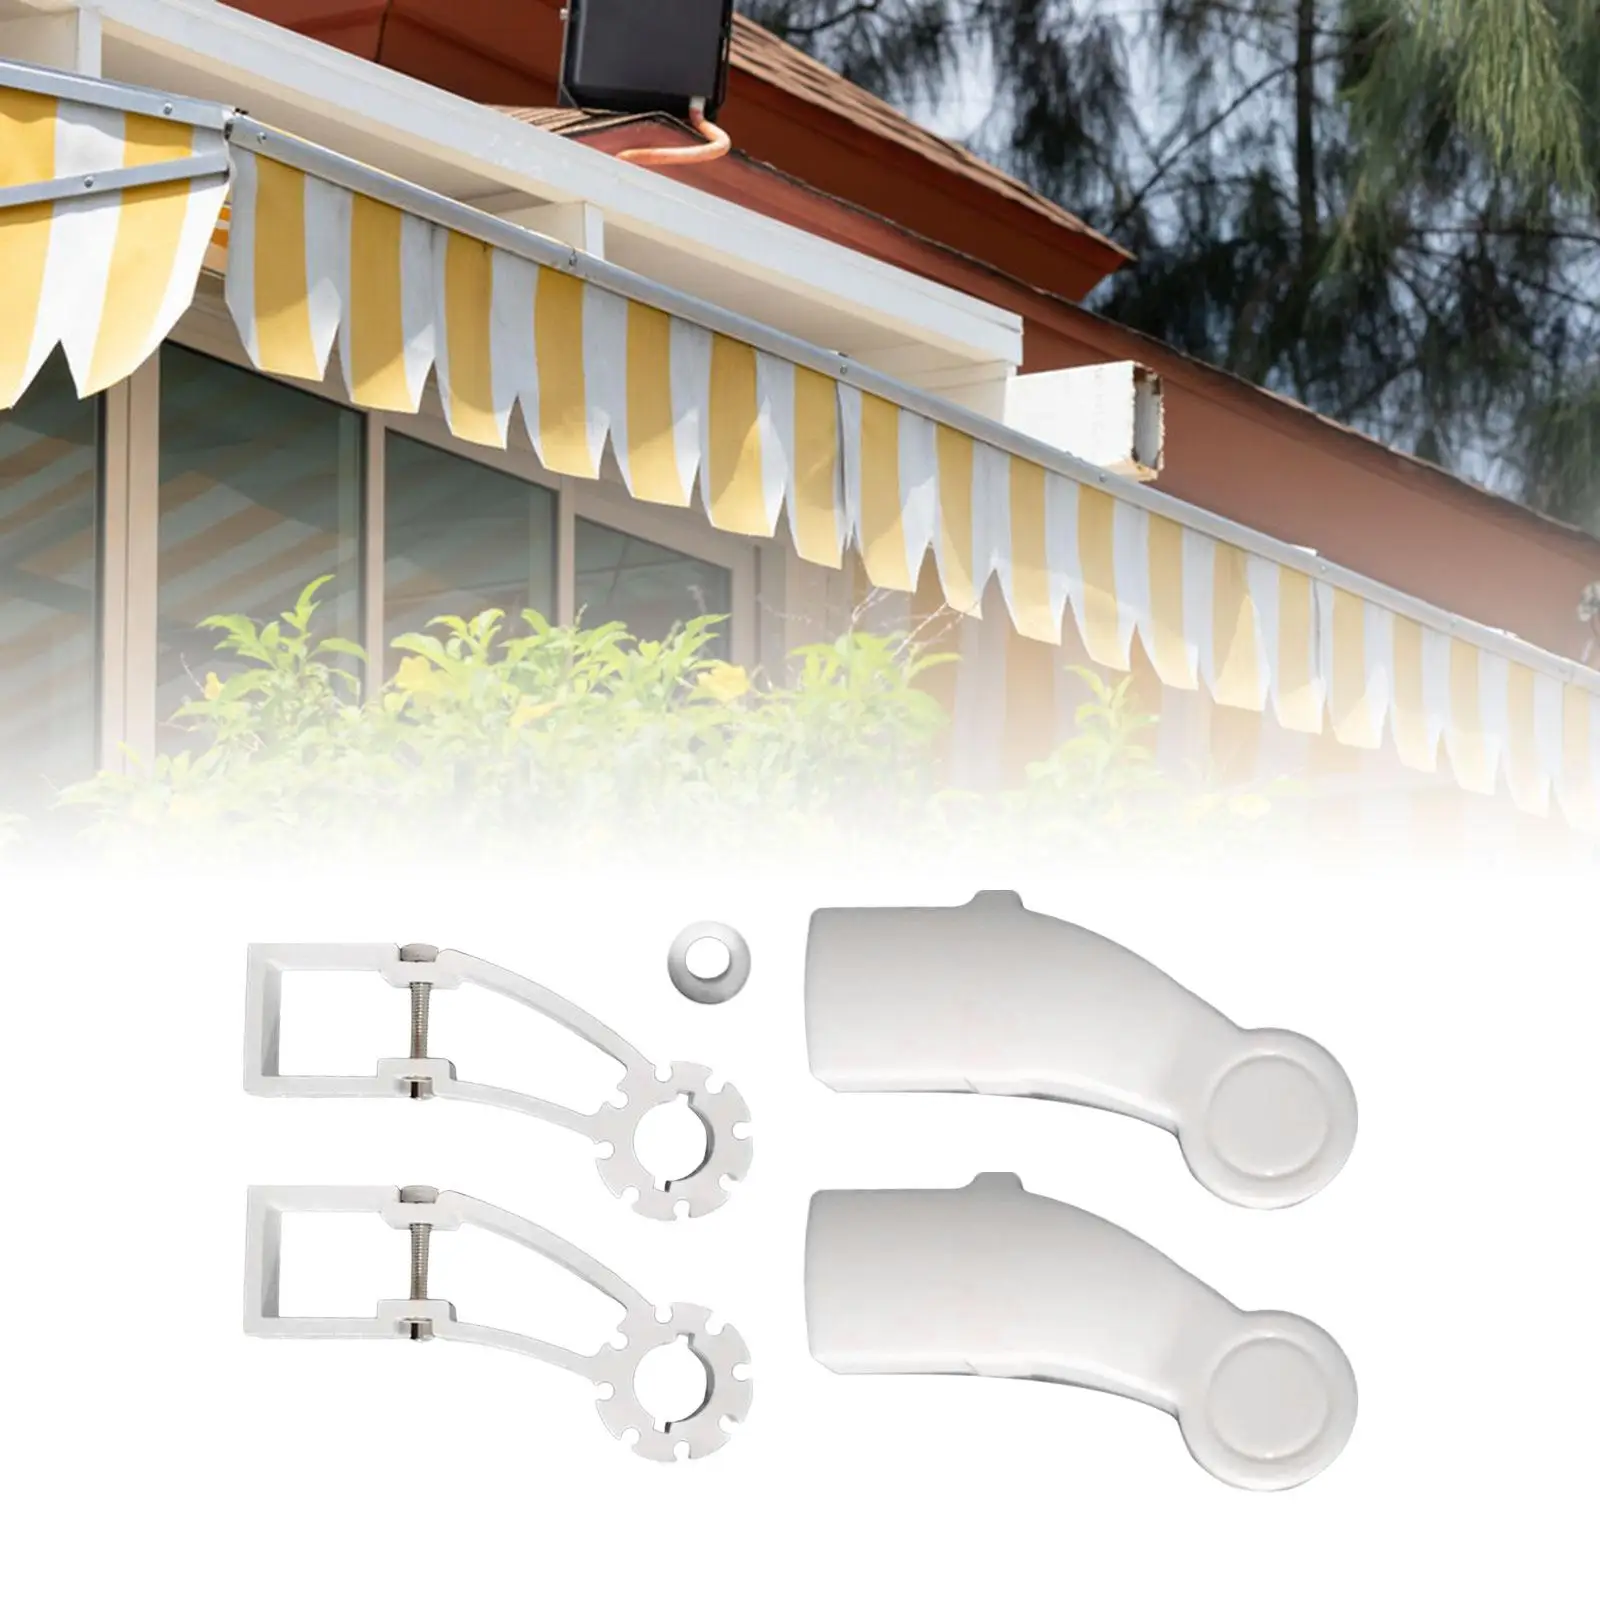 Awning Brackets 40mm Square Tube White Easy Installation Retractable Awning Gearbox Support Brackets Accessories for RV Camper